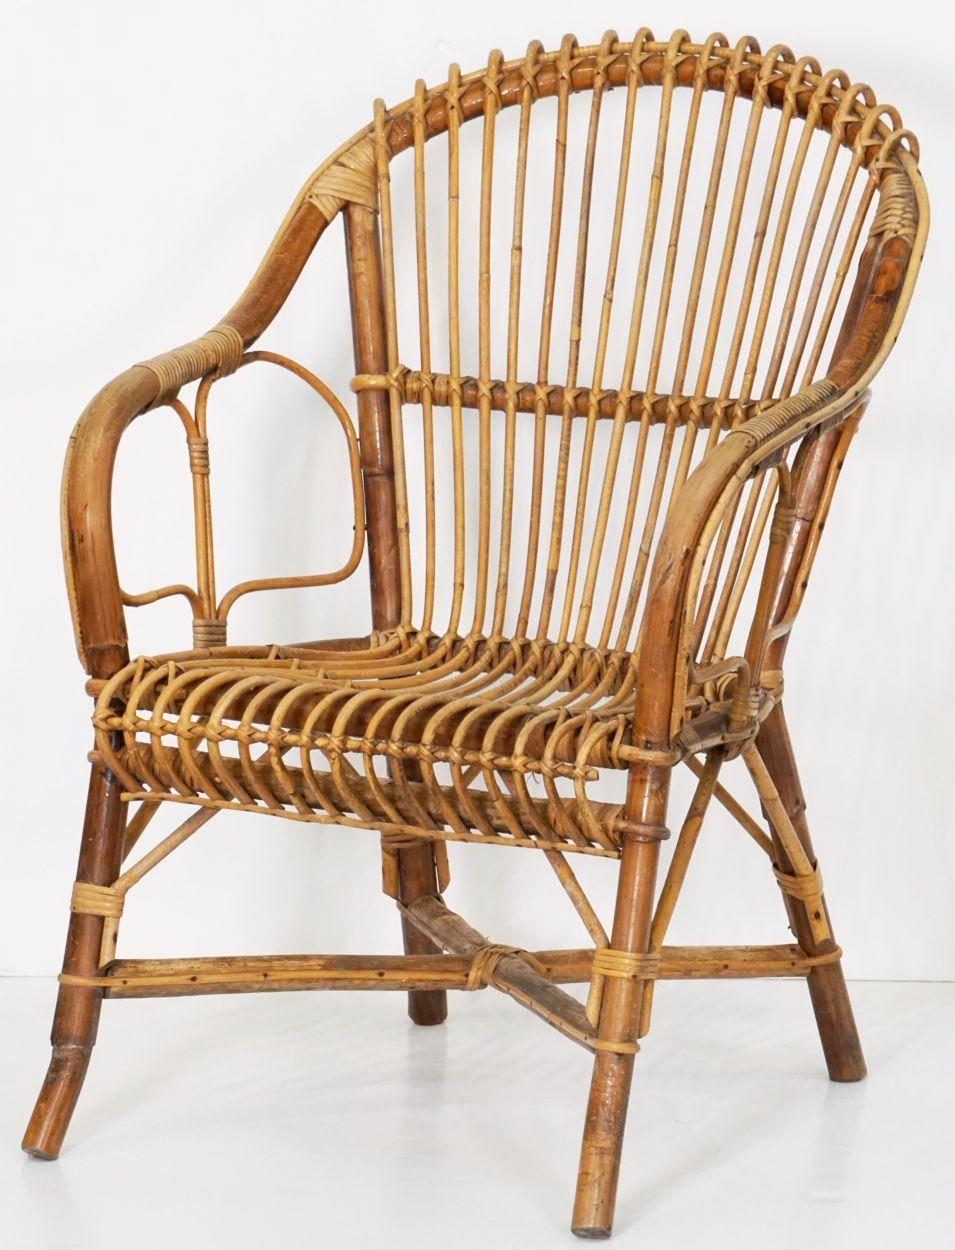 Italian Fan-Backed Arm Chairs of Rattan and Bamboo from the Mid-20th Century For Sale 6